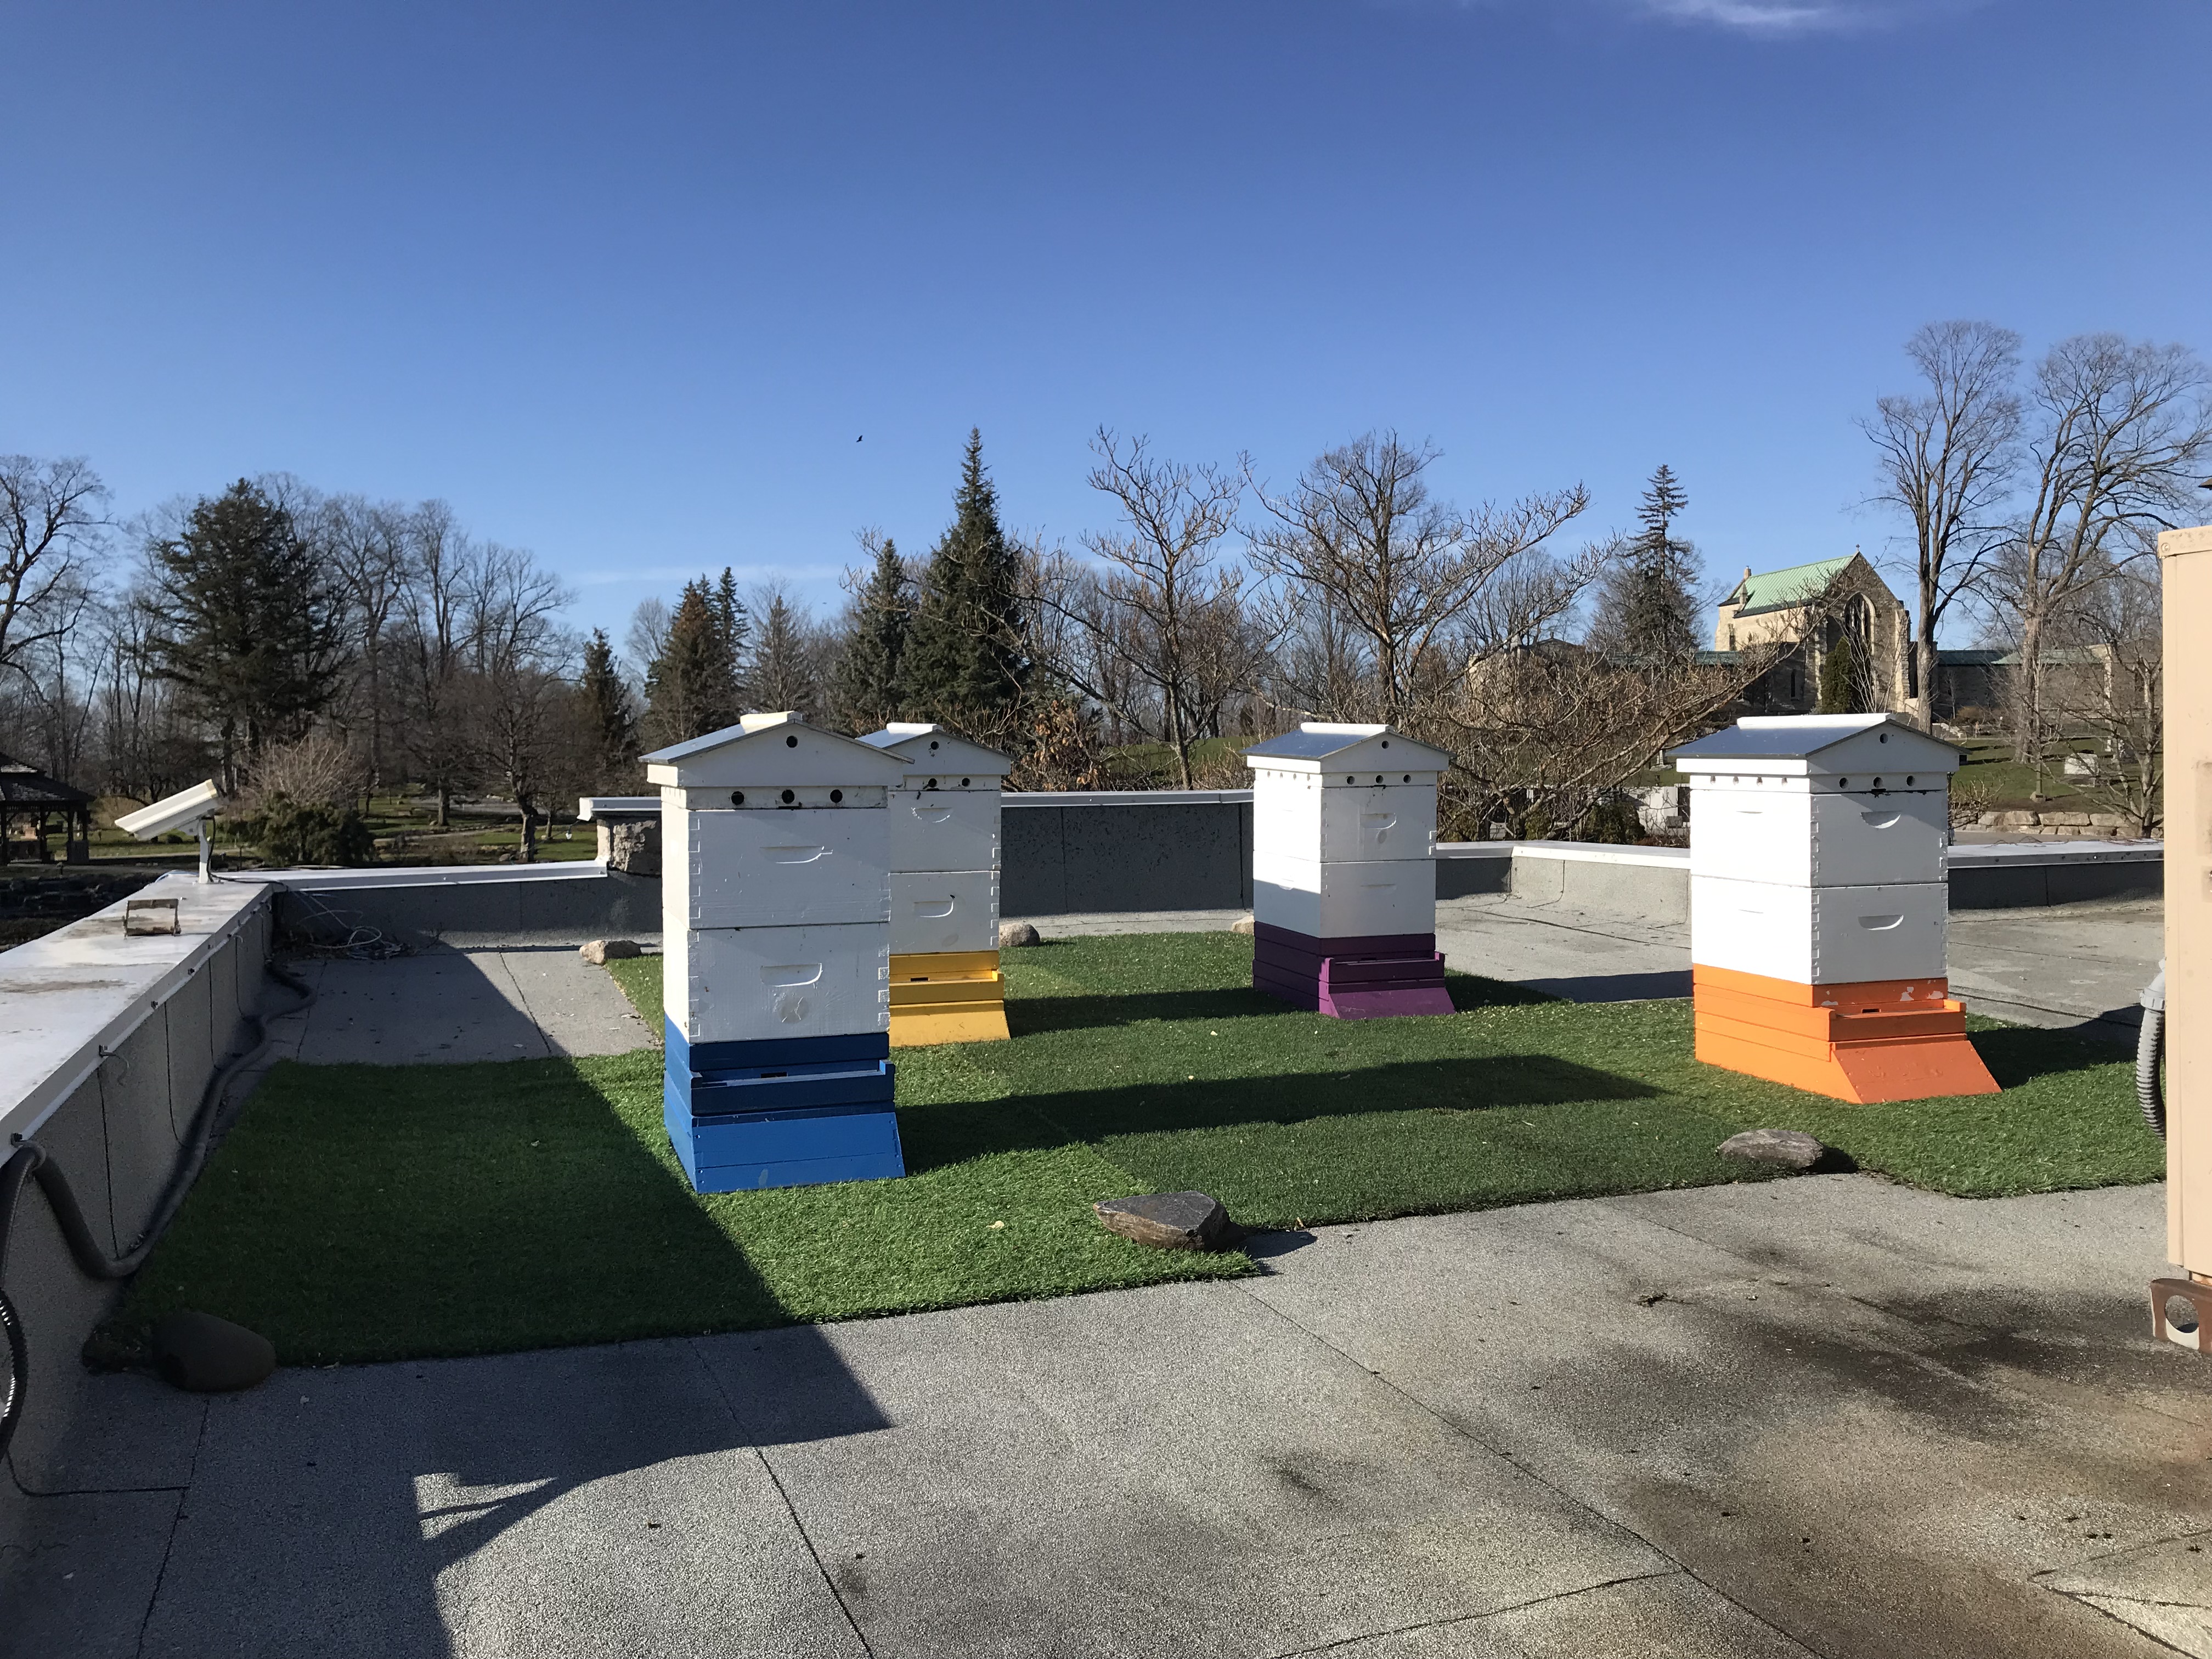 Bee hives